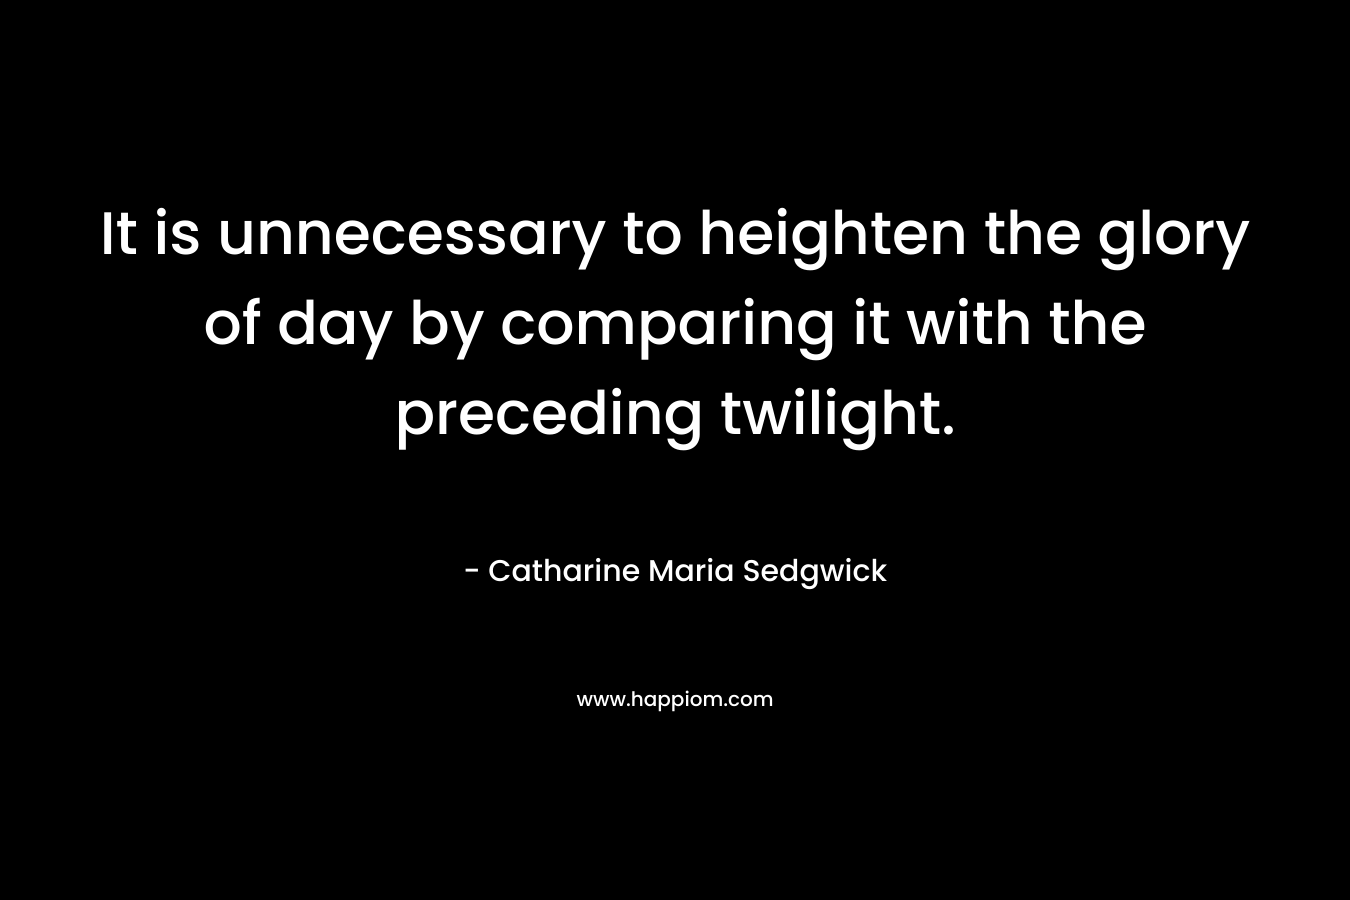 It is unnecessary to heighten the glory of day by comparing it with the preceding twilight.